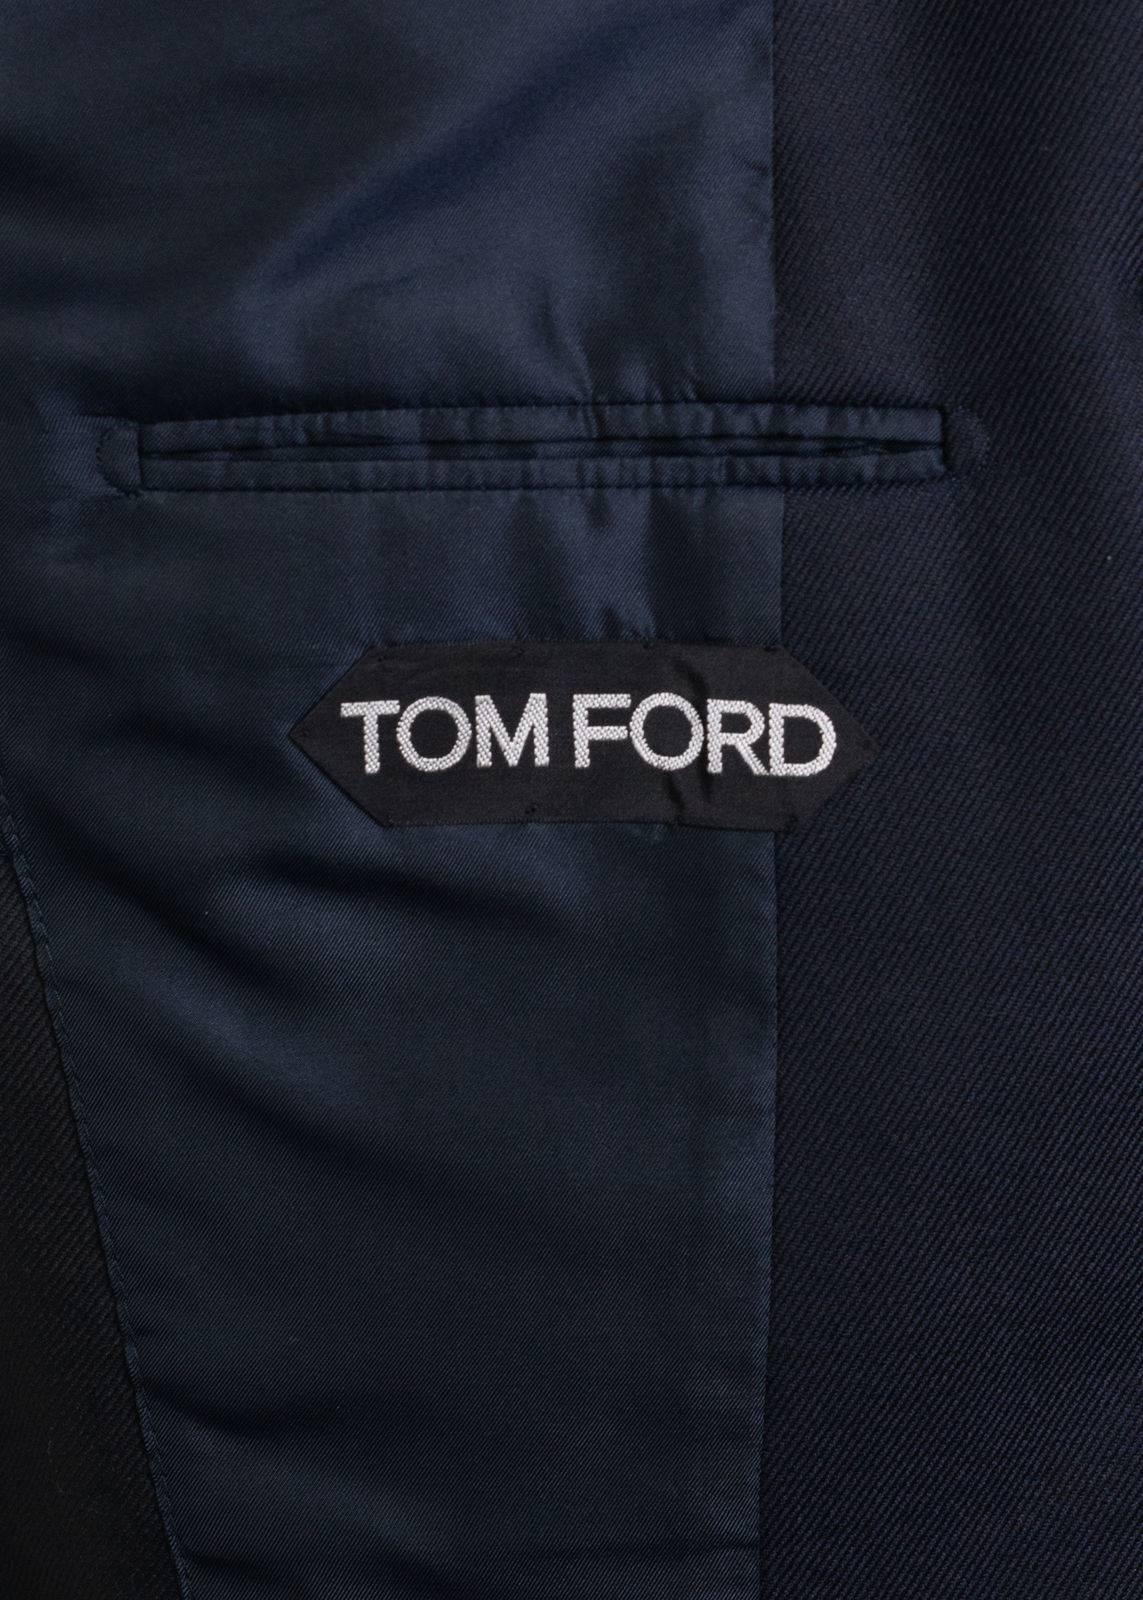 Step into the season in your durable Lightweight Peak Tom Ford Sports Jacket. This high quality Wool Jacket piece features classic Shelton Cut, 100% Wool, Solid Pattern,  2 Button and Patch Pockets. Pair this streamlined modern classic Jacket with